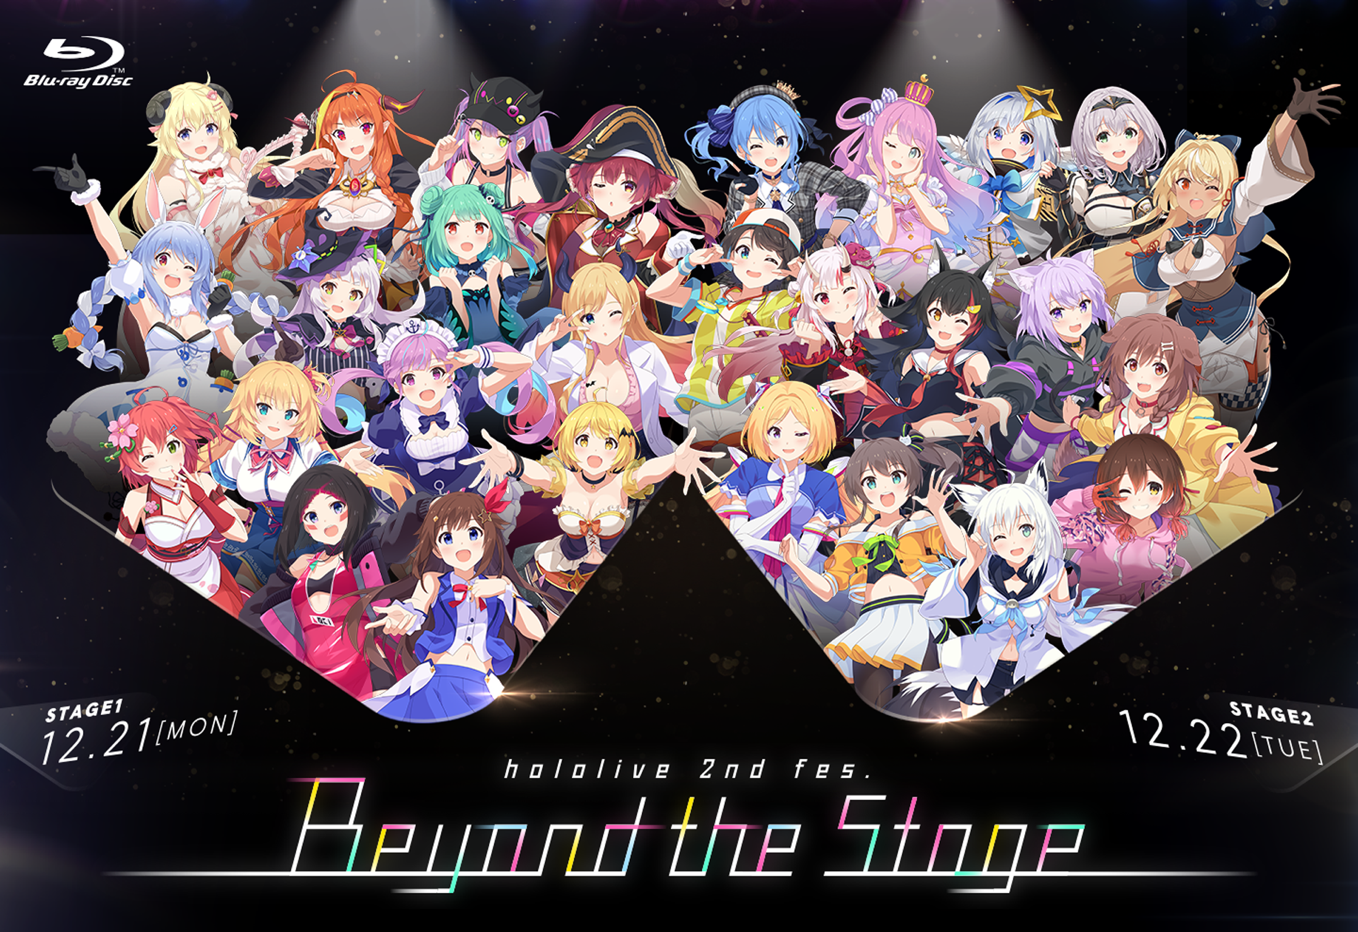 hololive 2nd fes. Beyond the Stage